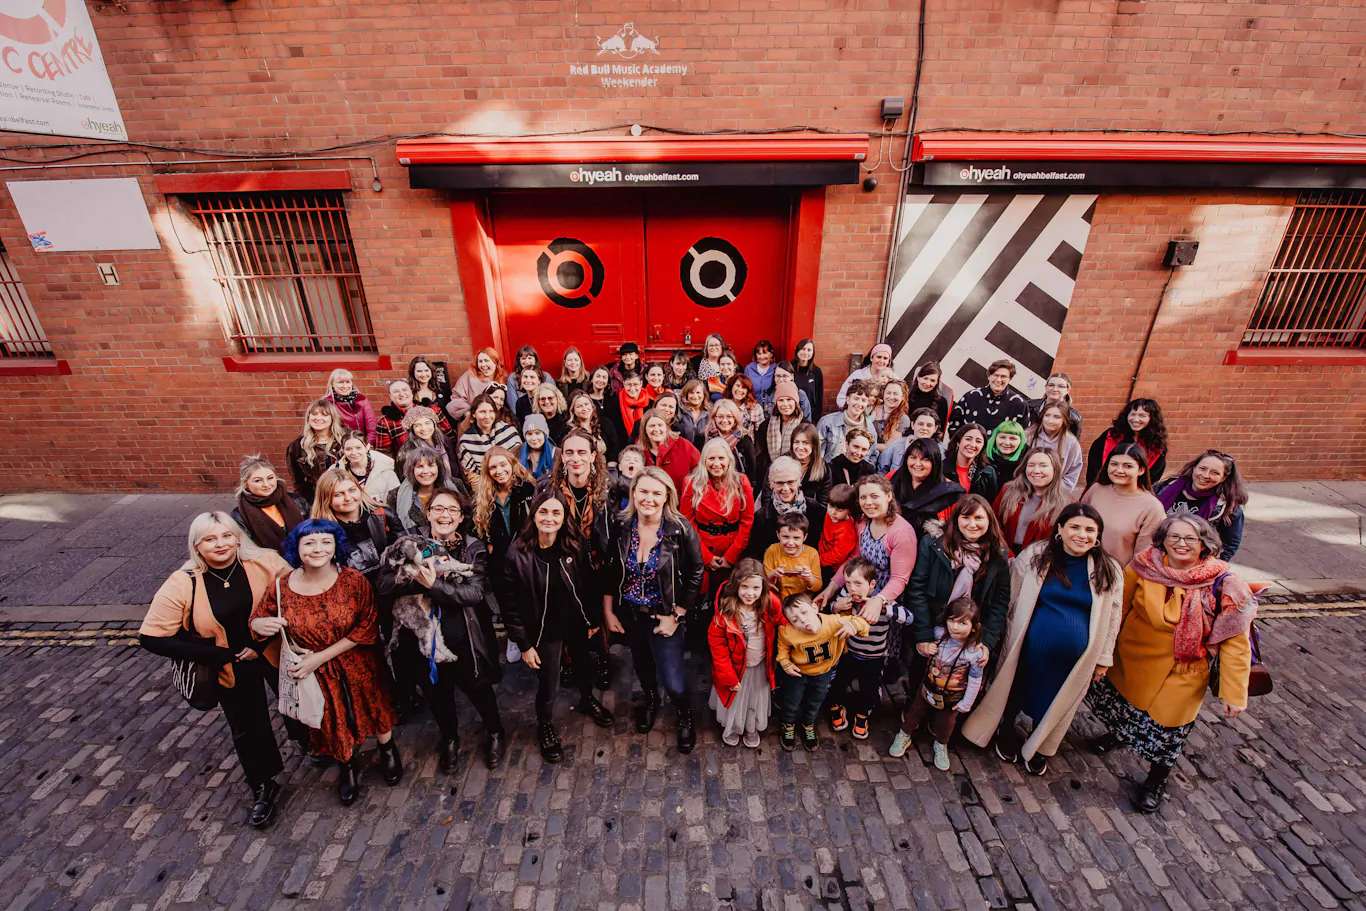 Women’s Work Festival 2022 starts this week in Belfast from 2nd – 5th June